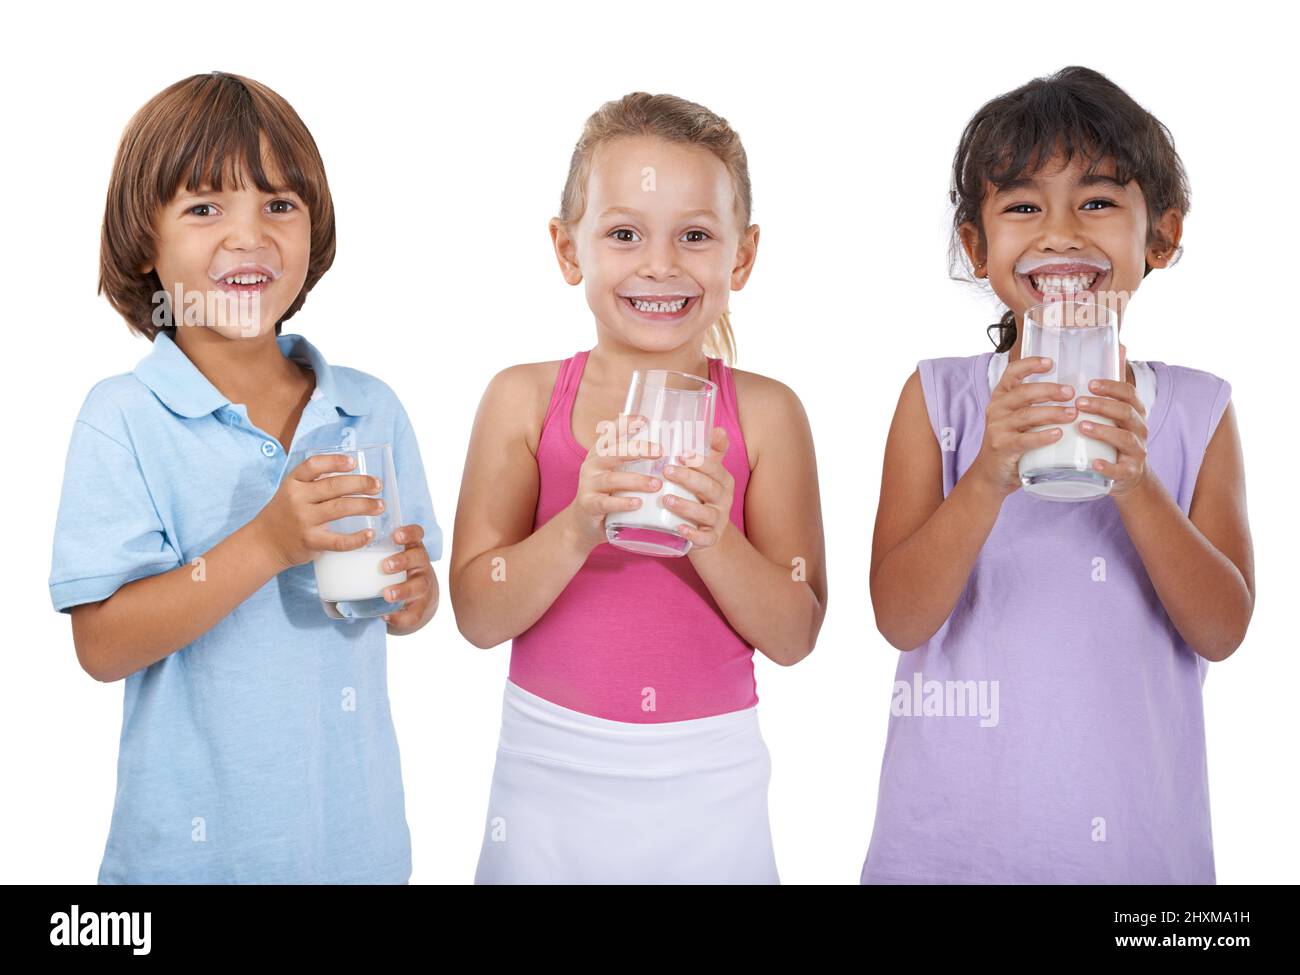 ..Got Milk. A group of three young children holding glasses of milk. Stock Photo